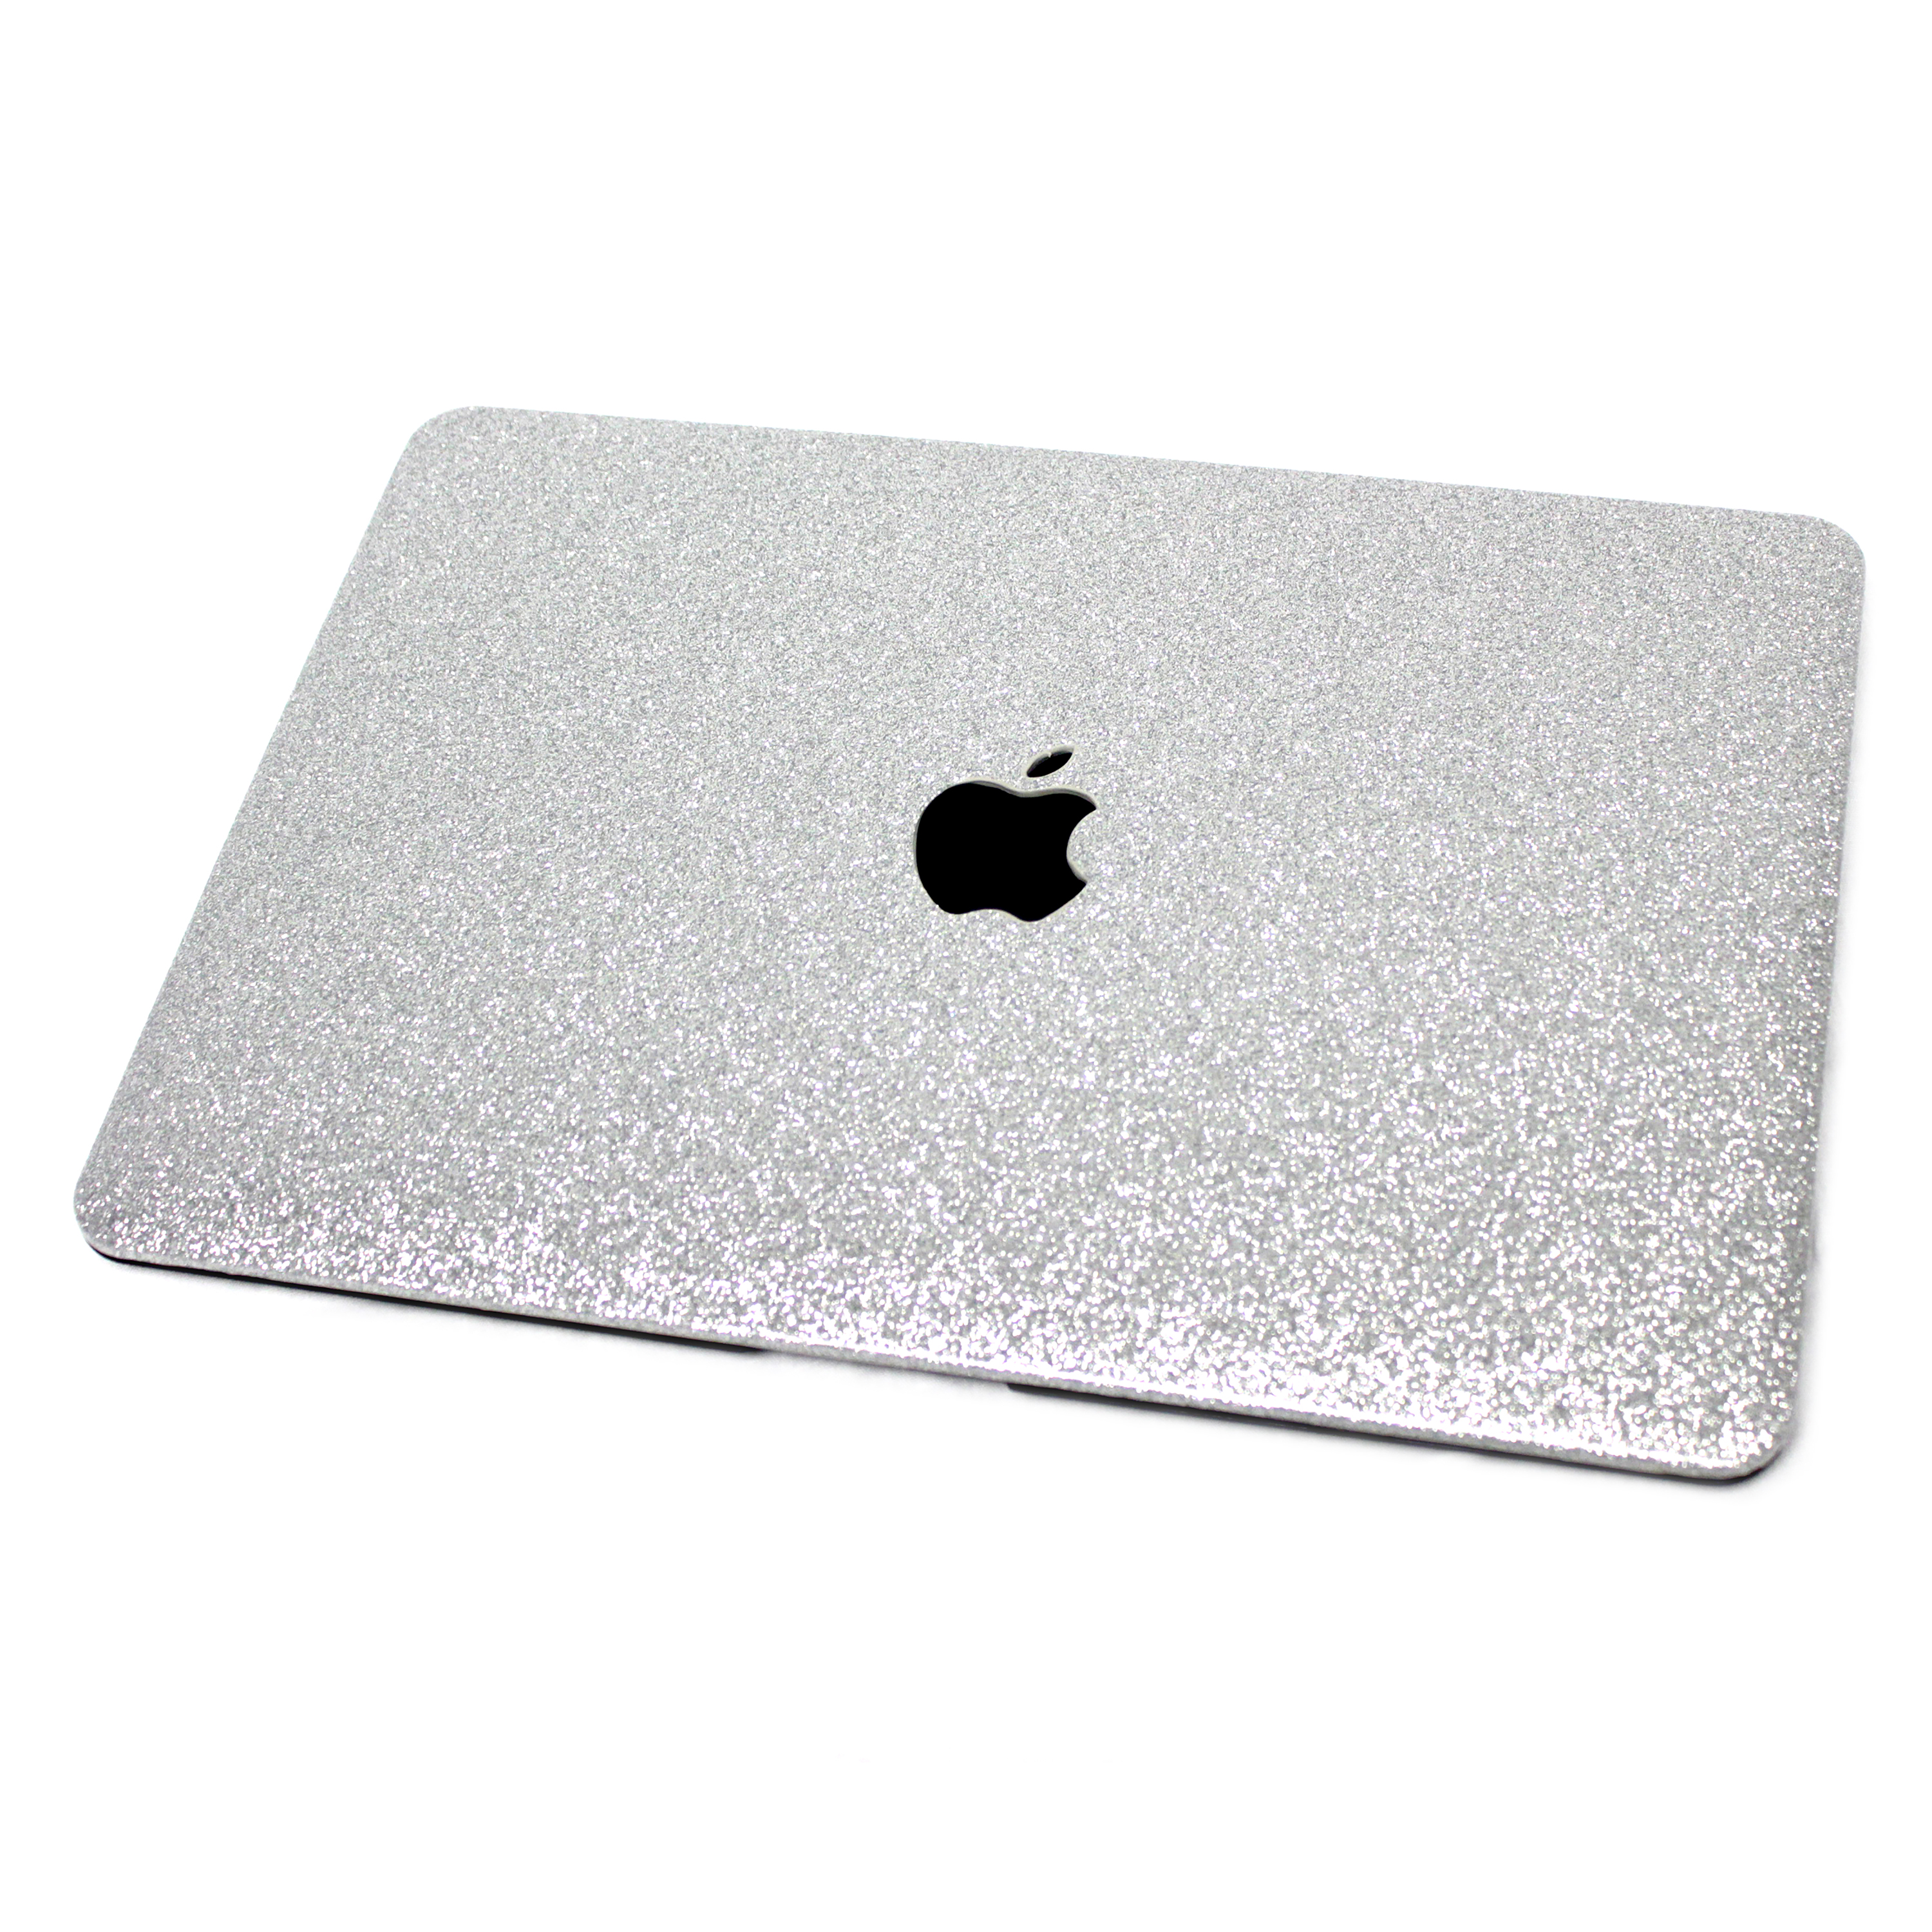 11color For Macbook Pro 13"A1278 Rubberized Frosted Matte Hard Case Cover Skin 